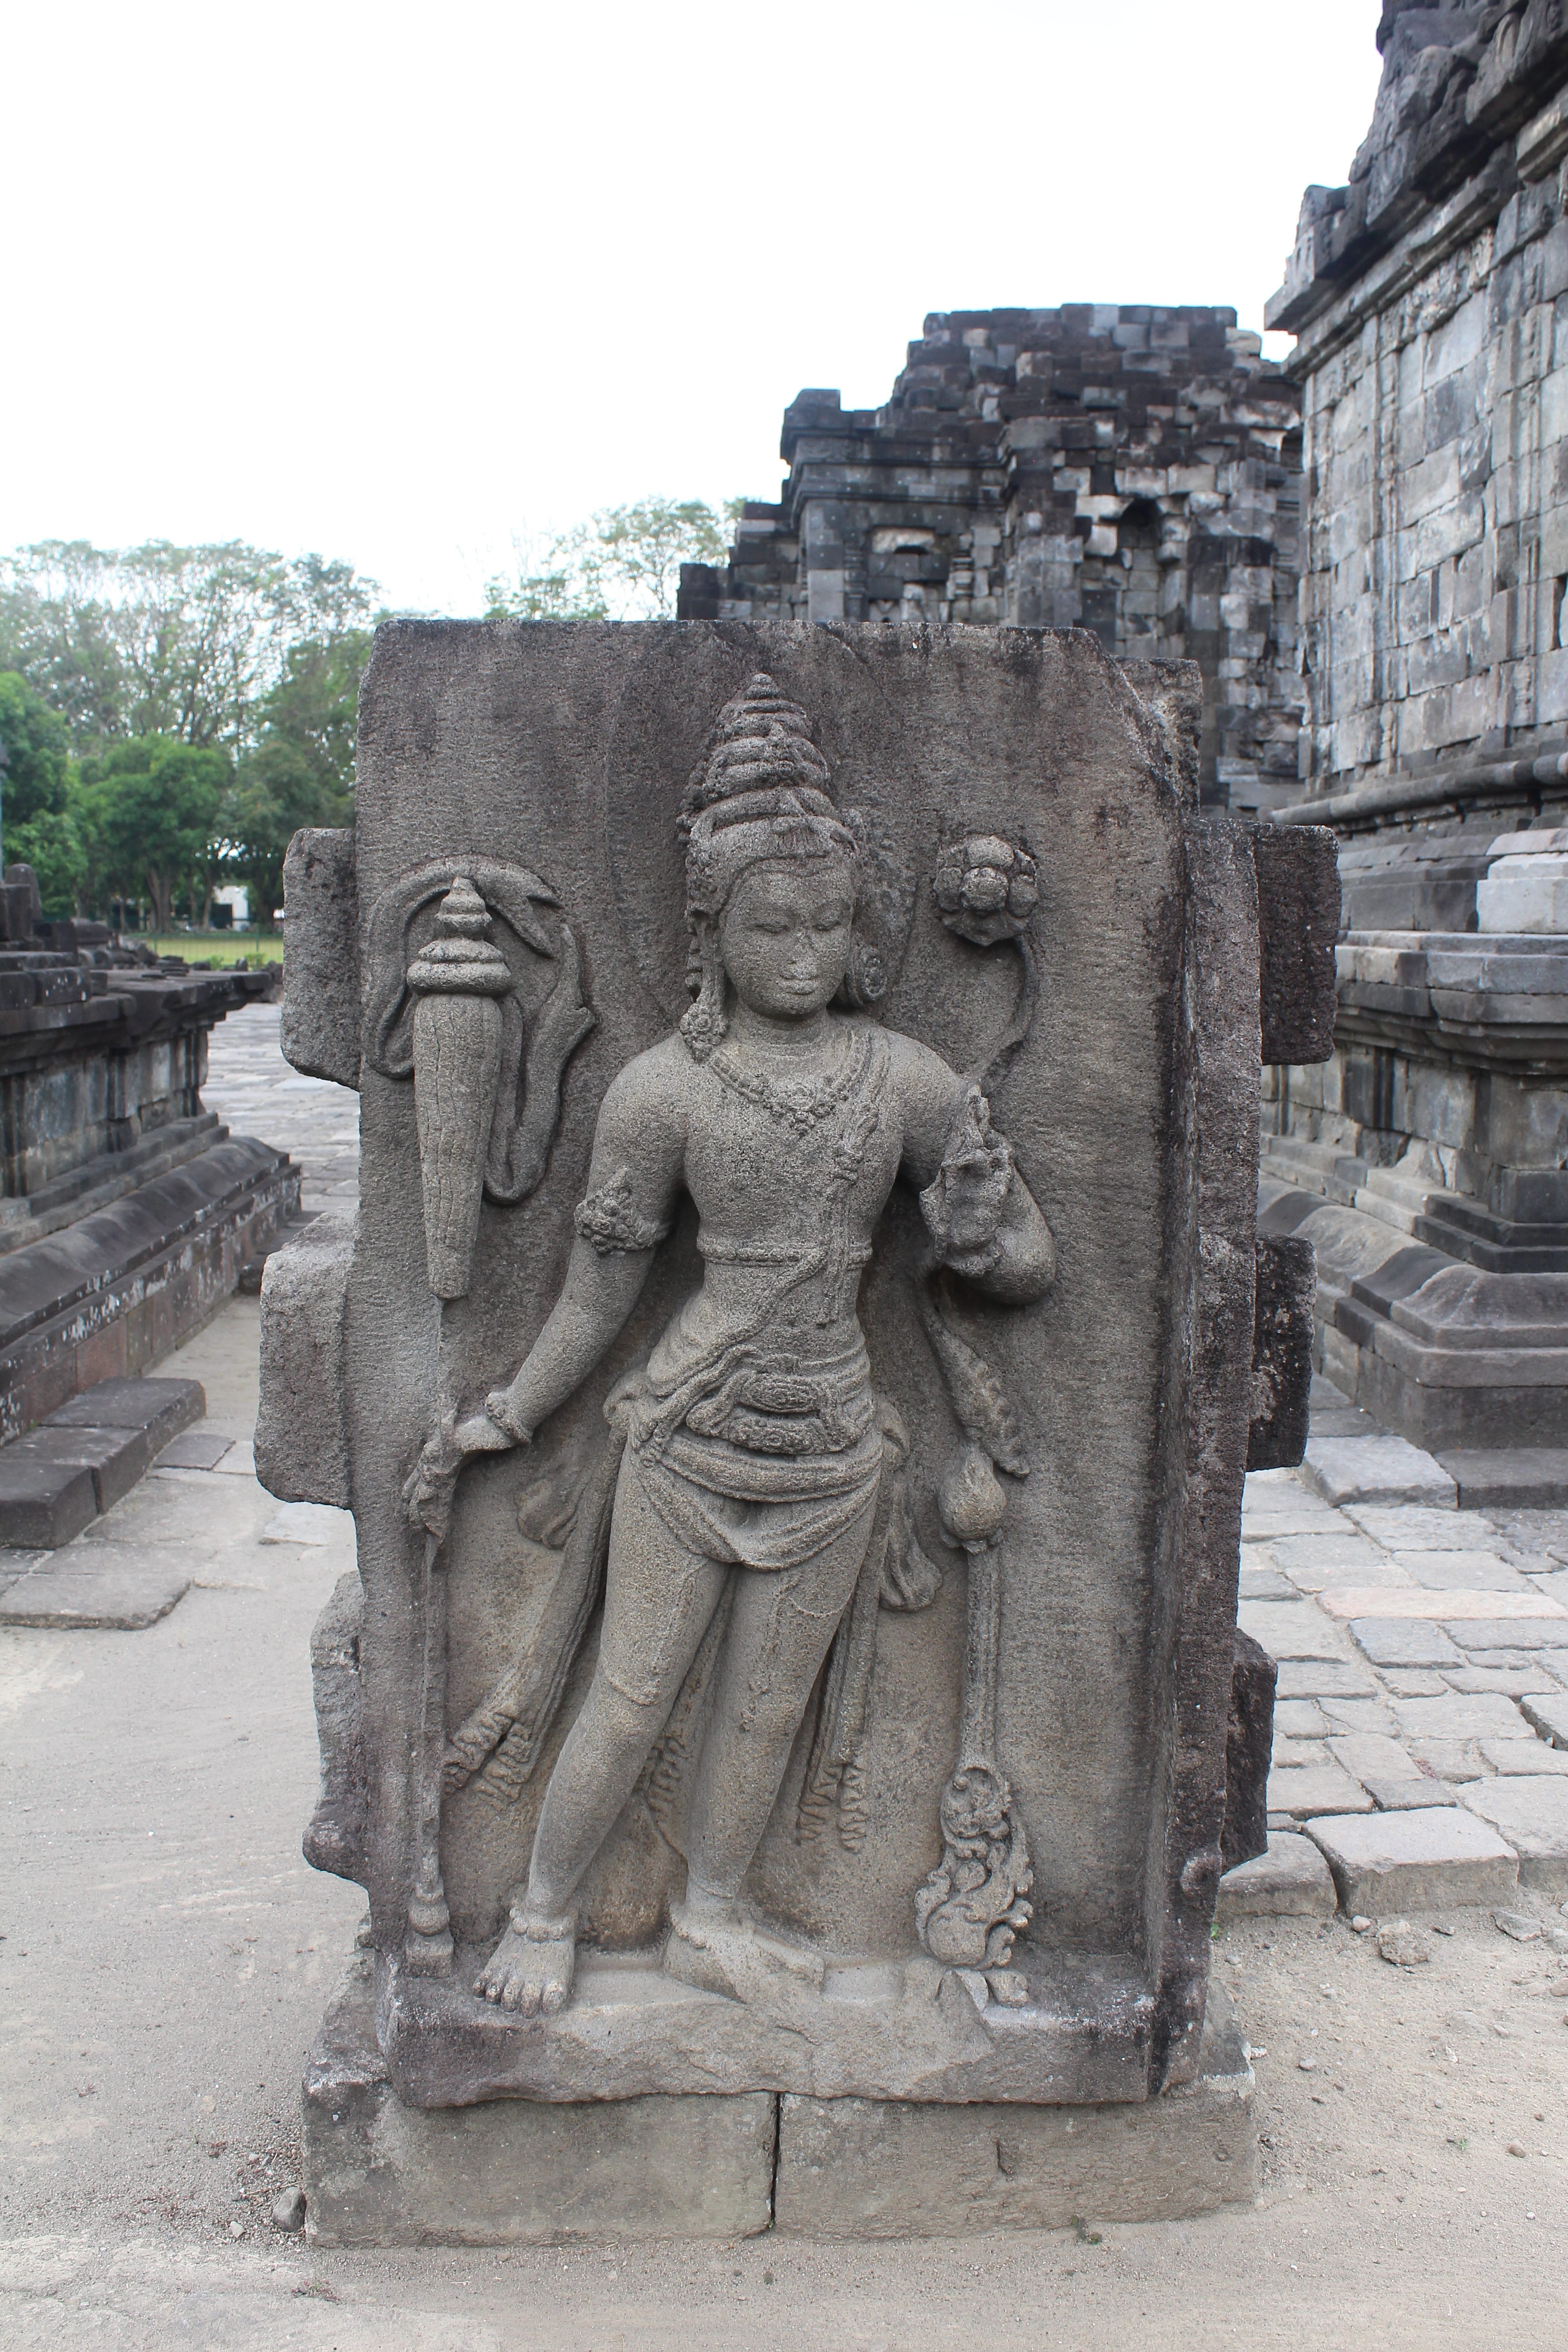 Stone slab with Buddhist figure (Padmapani) carved in relief, in a temple courtyard